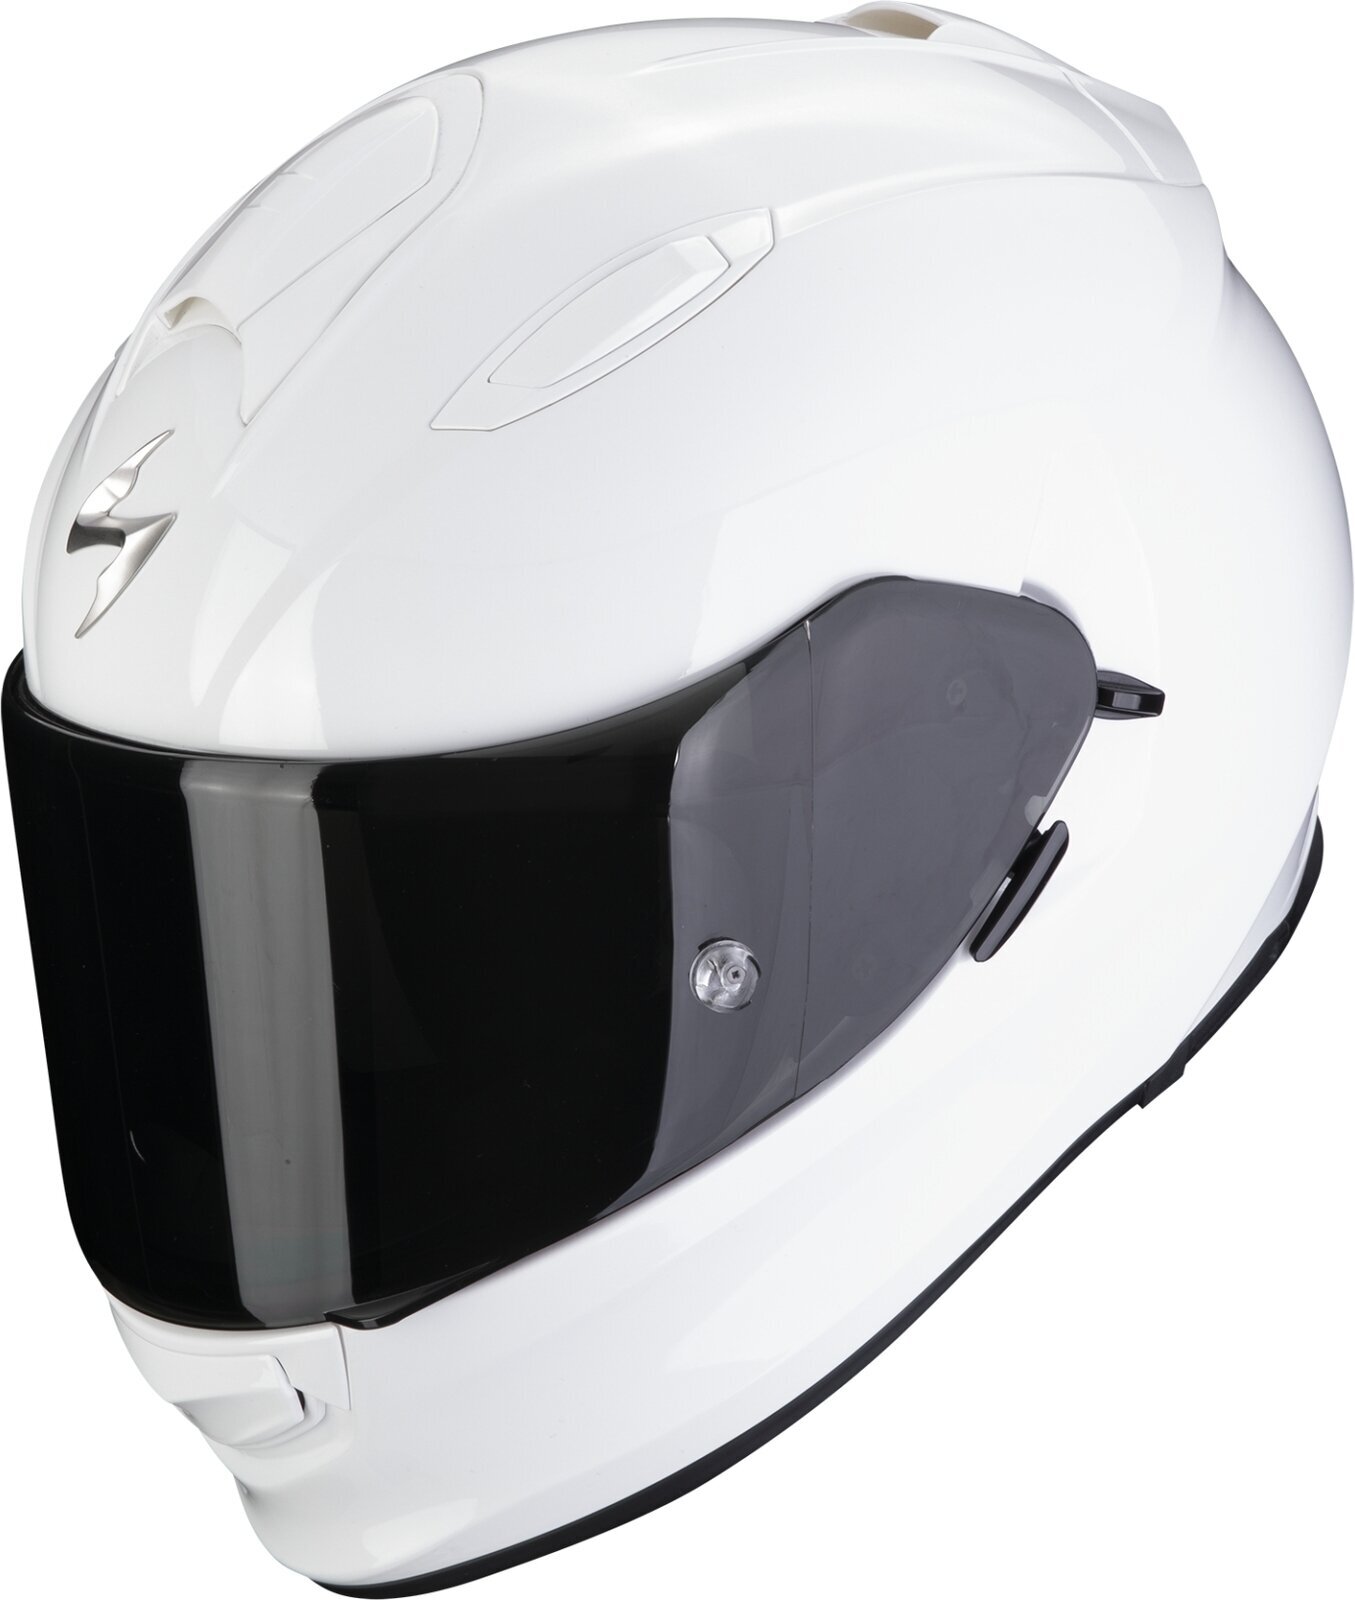 Helm Scorpion EXO 491 SOLID White XS Helm